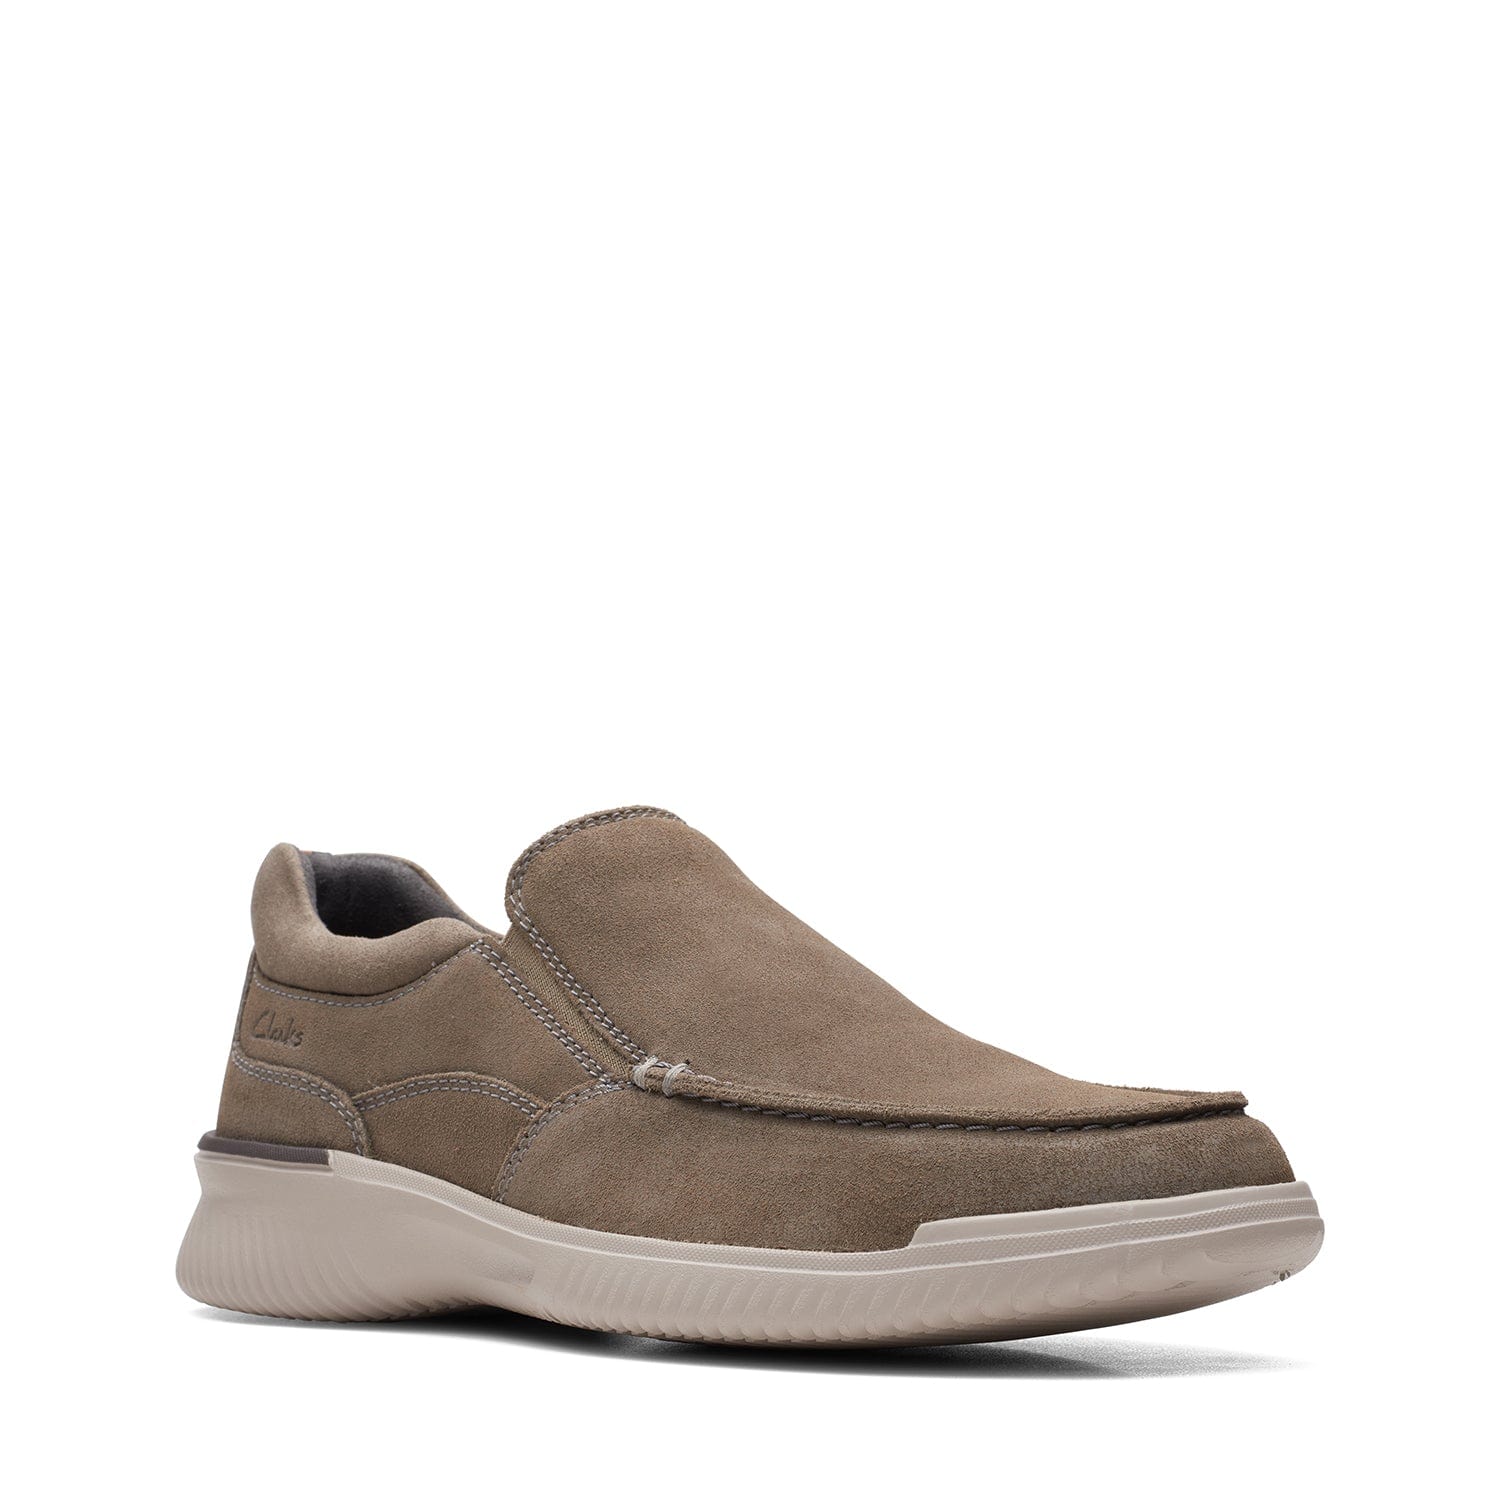 Clarks Donaway Free - Shoes - Stone - 261654428 - H Width (Wide Fit)